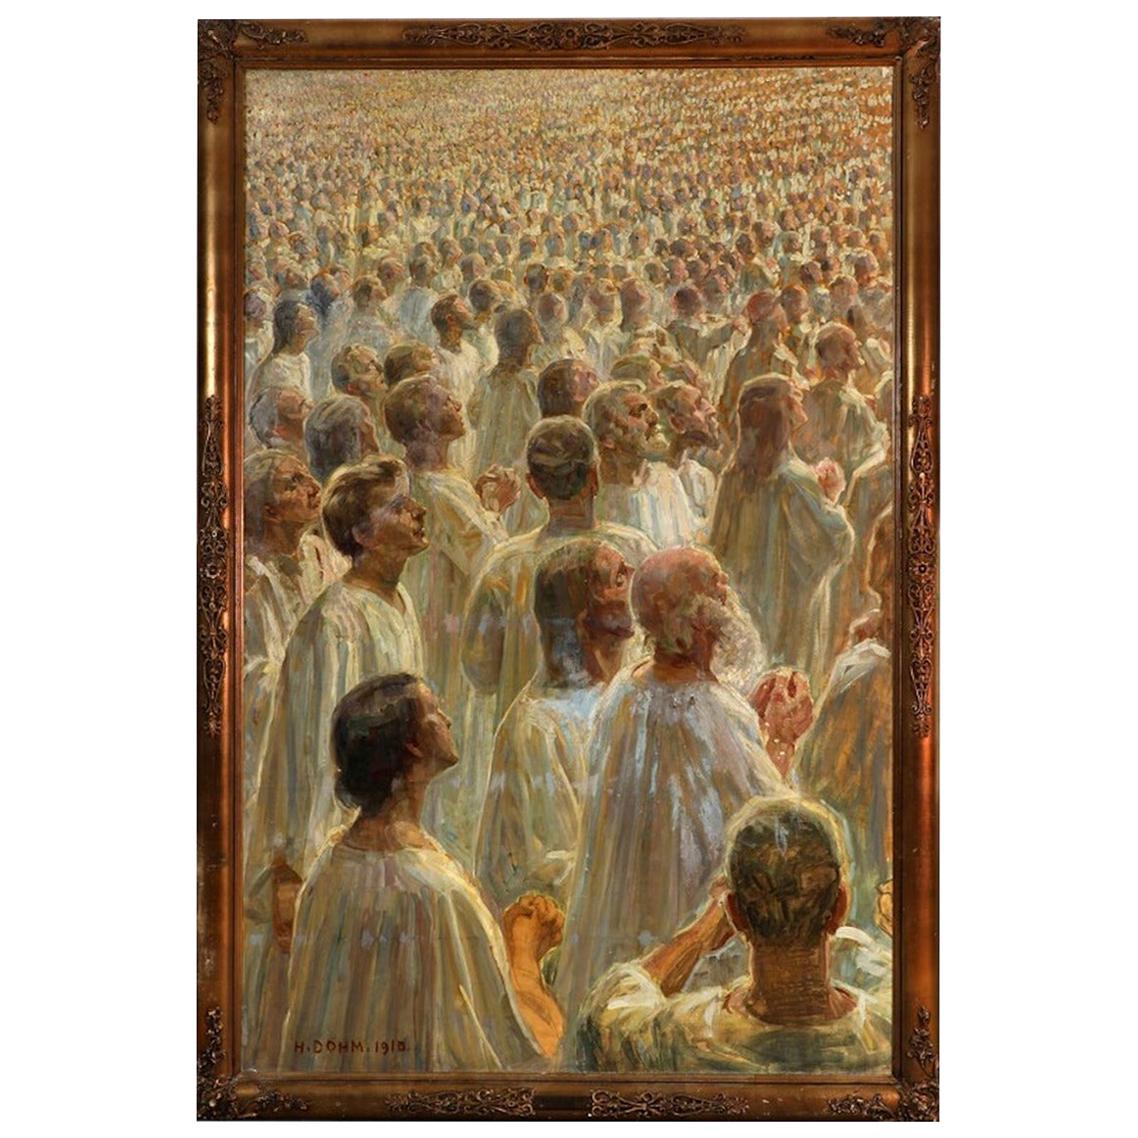 1910 Study for "The Large white crowd", Heinrich August Emil Dohm, Denmark